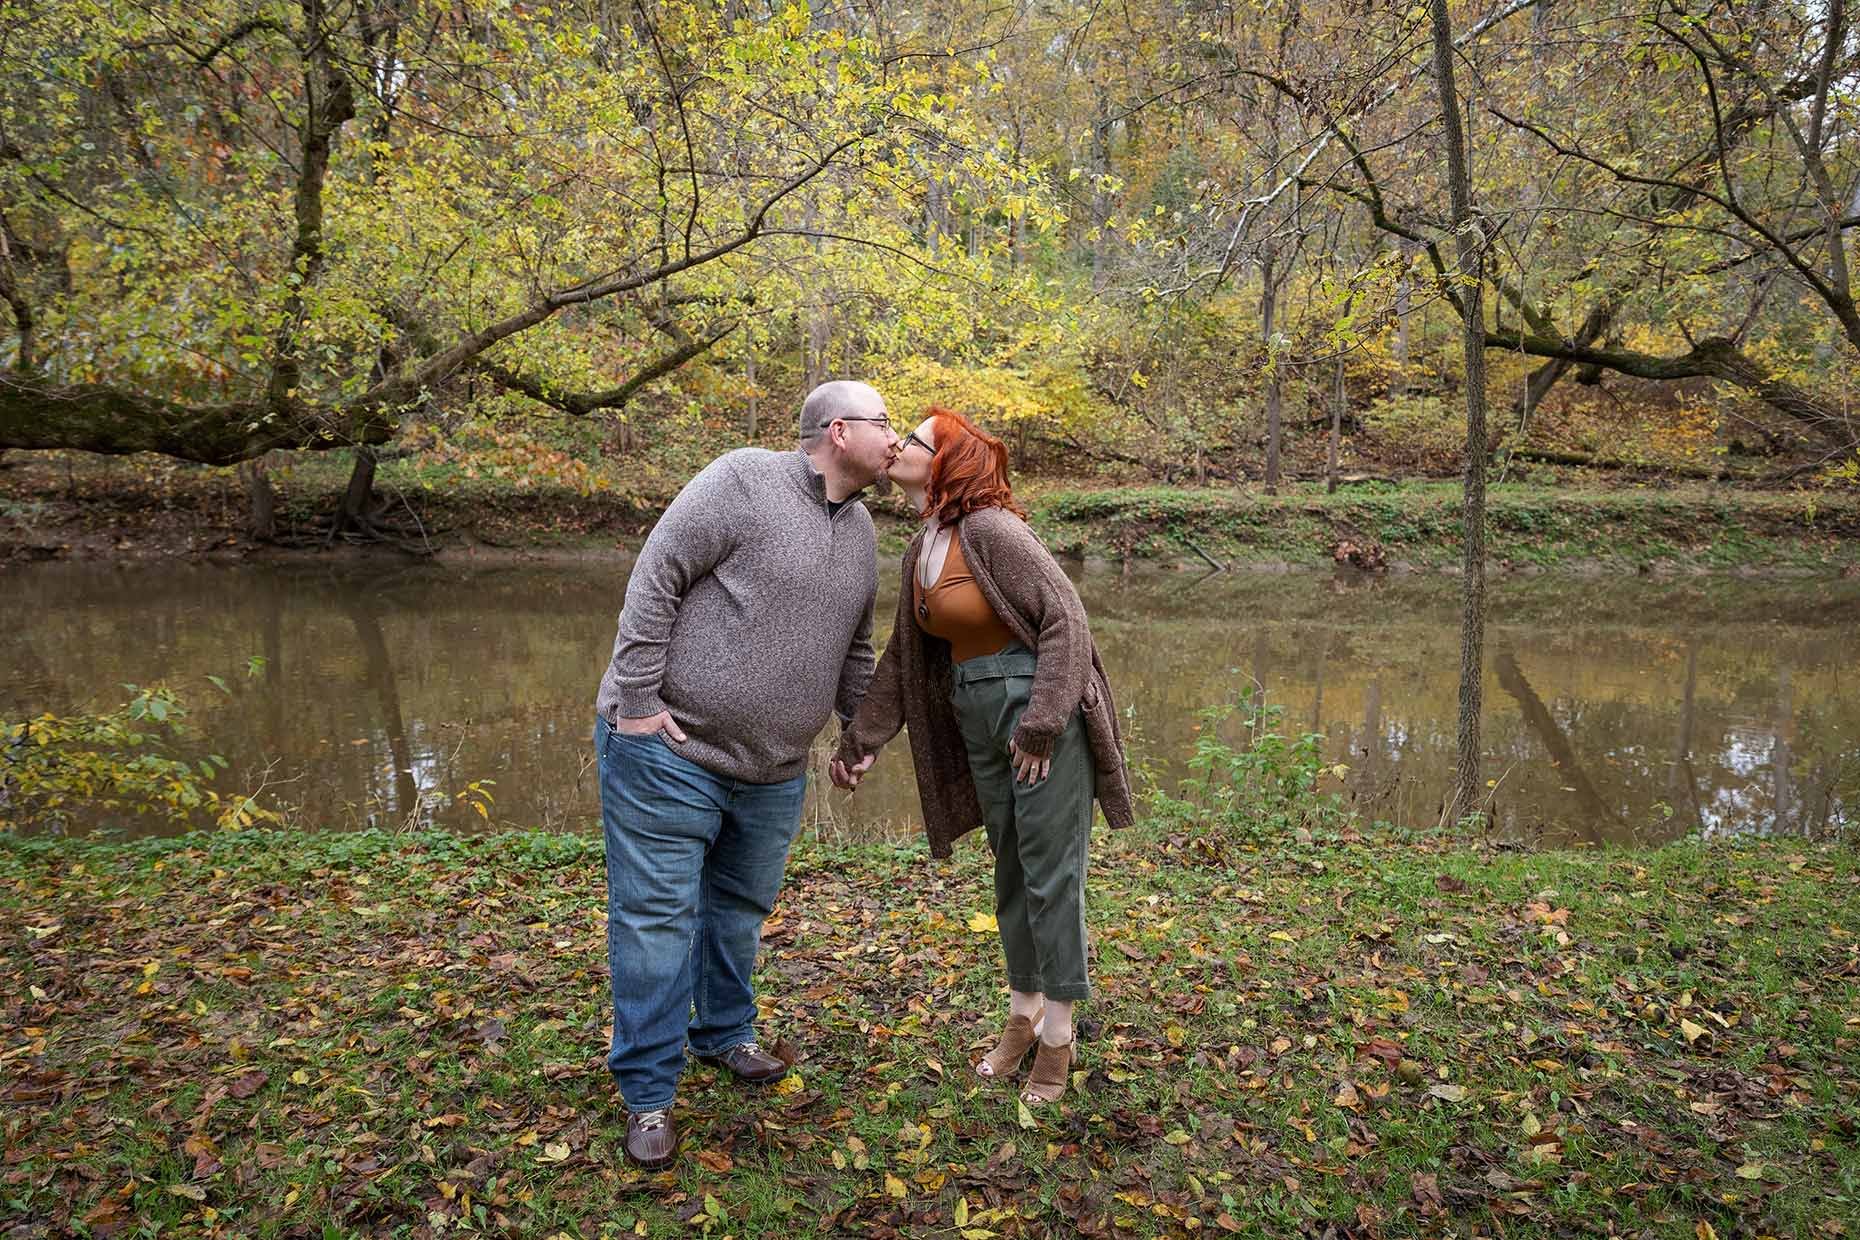 Engagement photos by the river in fall